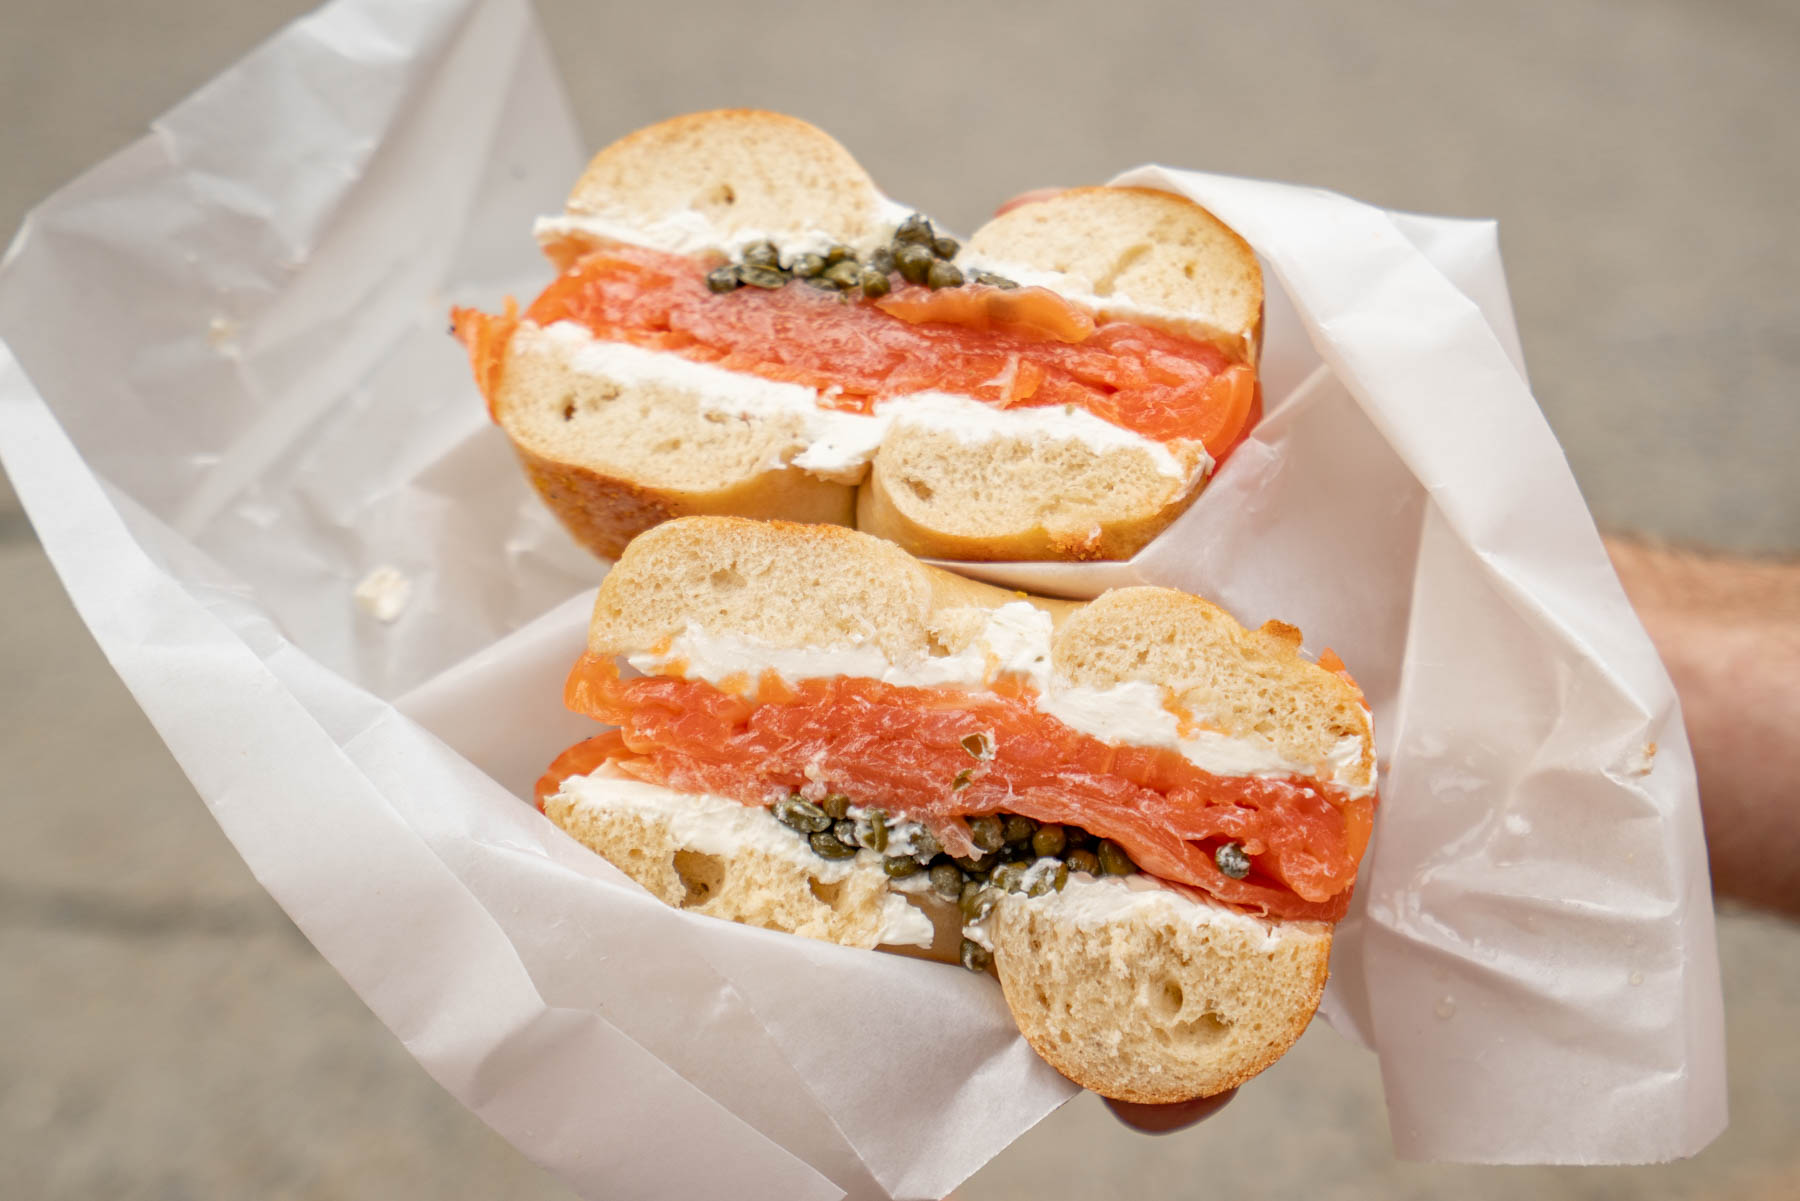 best things to do UWS
Barney Greengrass Bagels